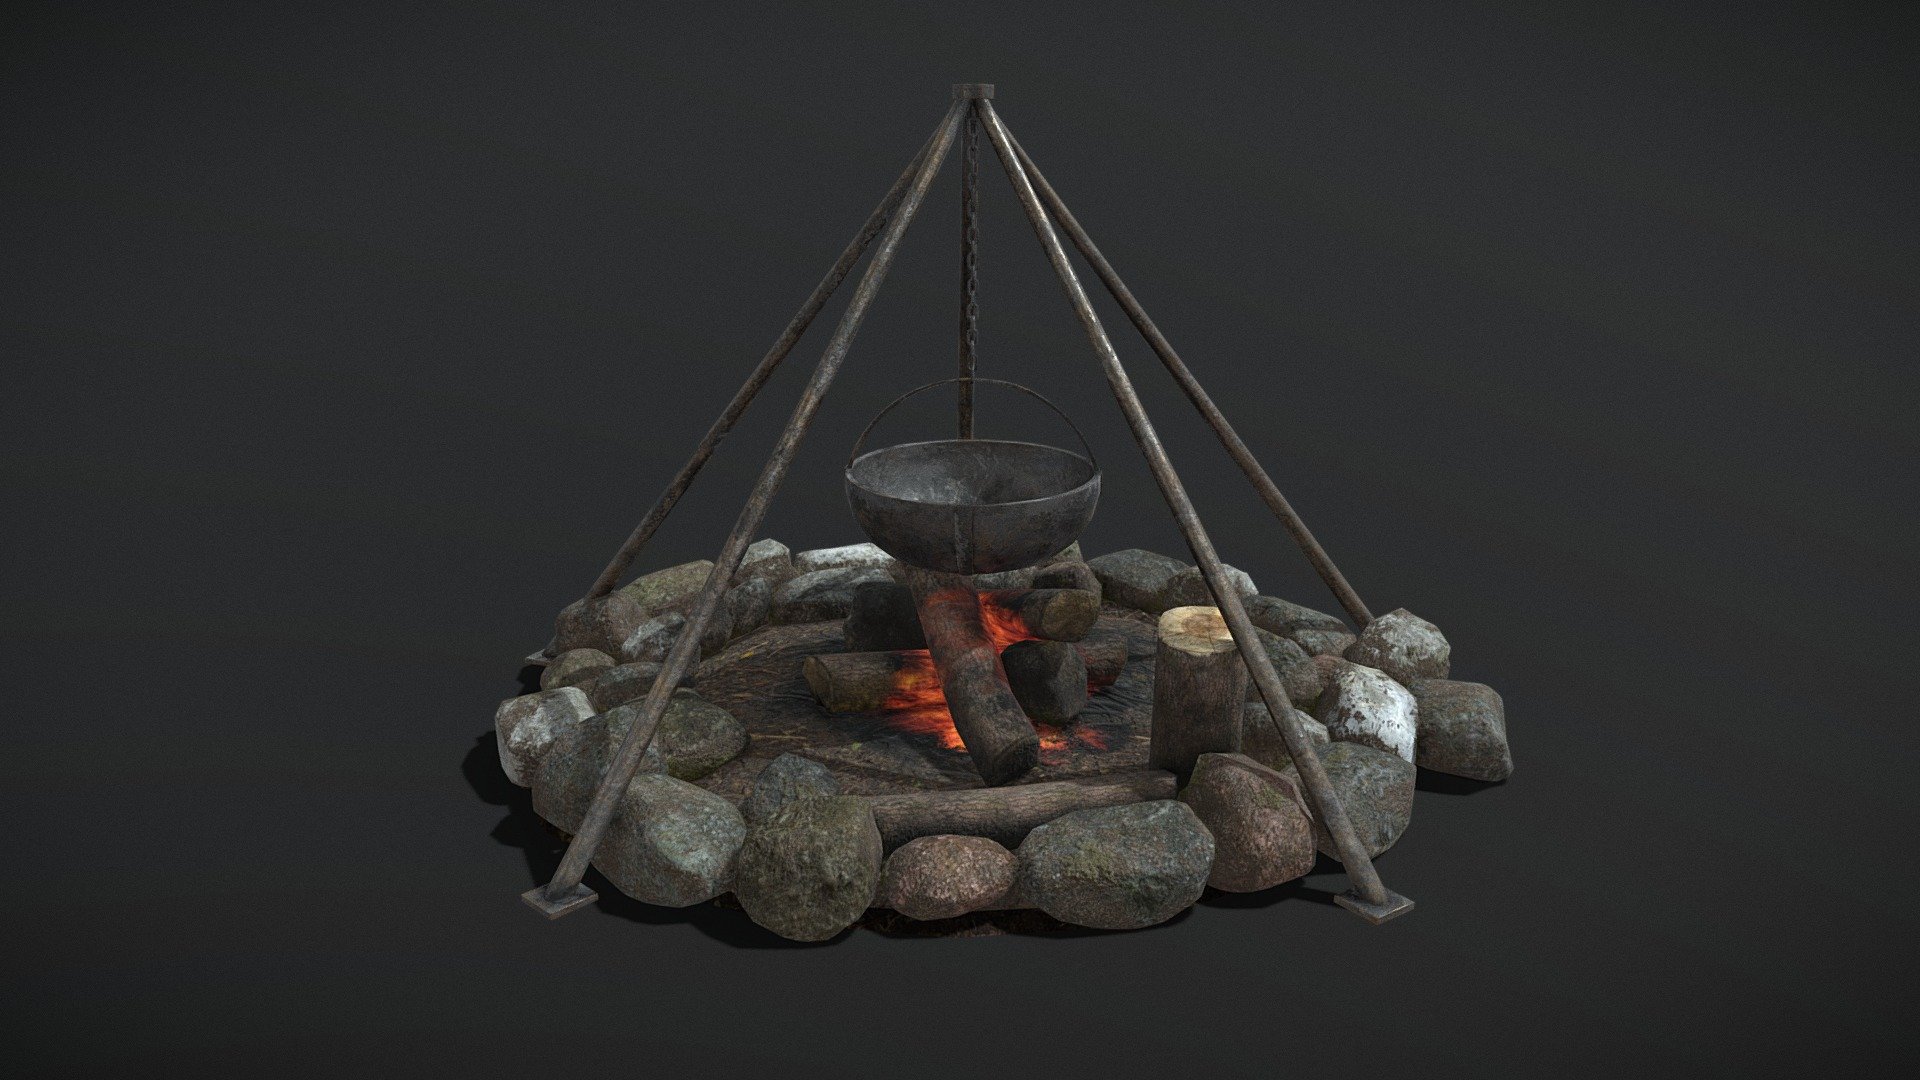 Fire Pit with Hanging Cauldron 3D Model PBR Texture available in 4096 x 4096 Maps include : Basecolor, Normal, Roughness, Height and Metallic. 

Cauldron : 
VR / AR / Low-poly
PBR approved
Geometry Polygon mesh
Polygons 5,515
Vertices 5,653
Textures PNG 

Firepit: 
VR / AR / Low-polyapproved
PBR approved
Geometry Polygon mesh
Polygons 4,985
Vertices 4,842
Textures PNG

From the Creators at Get Dead Entertainment. Please like and Rate! Follow us on FaceBook and Instagram to keep updated on all our newest models 3d model